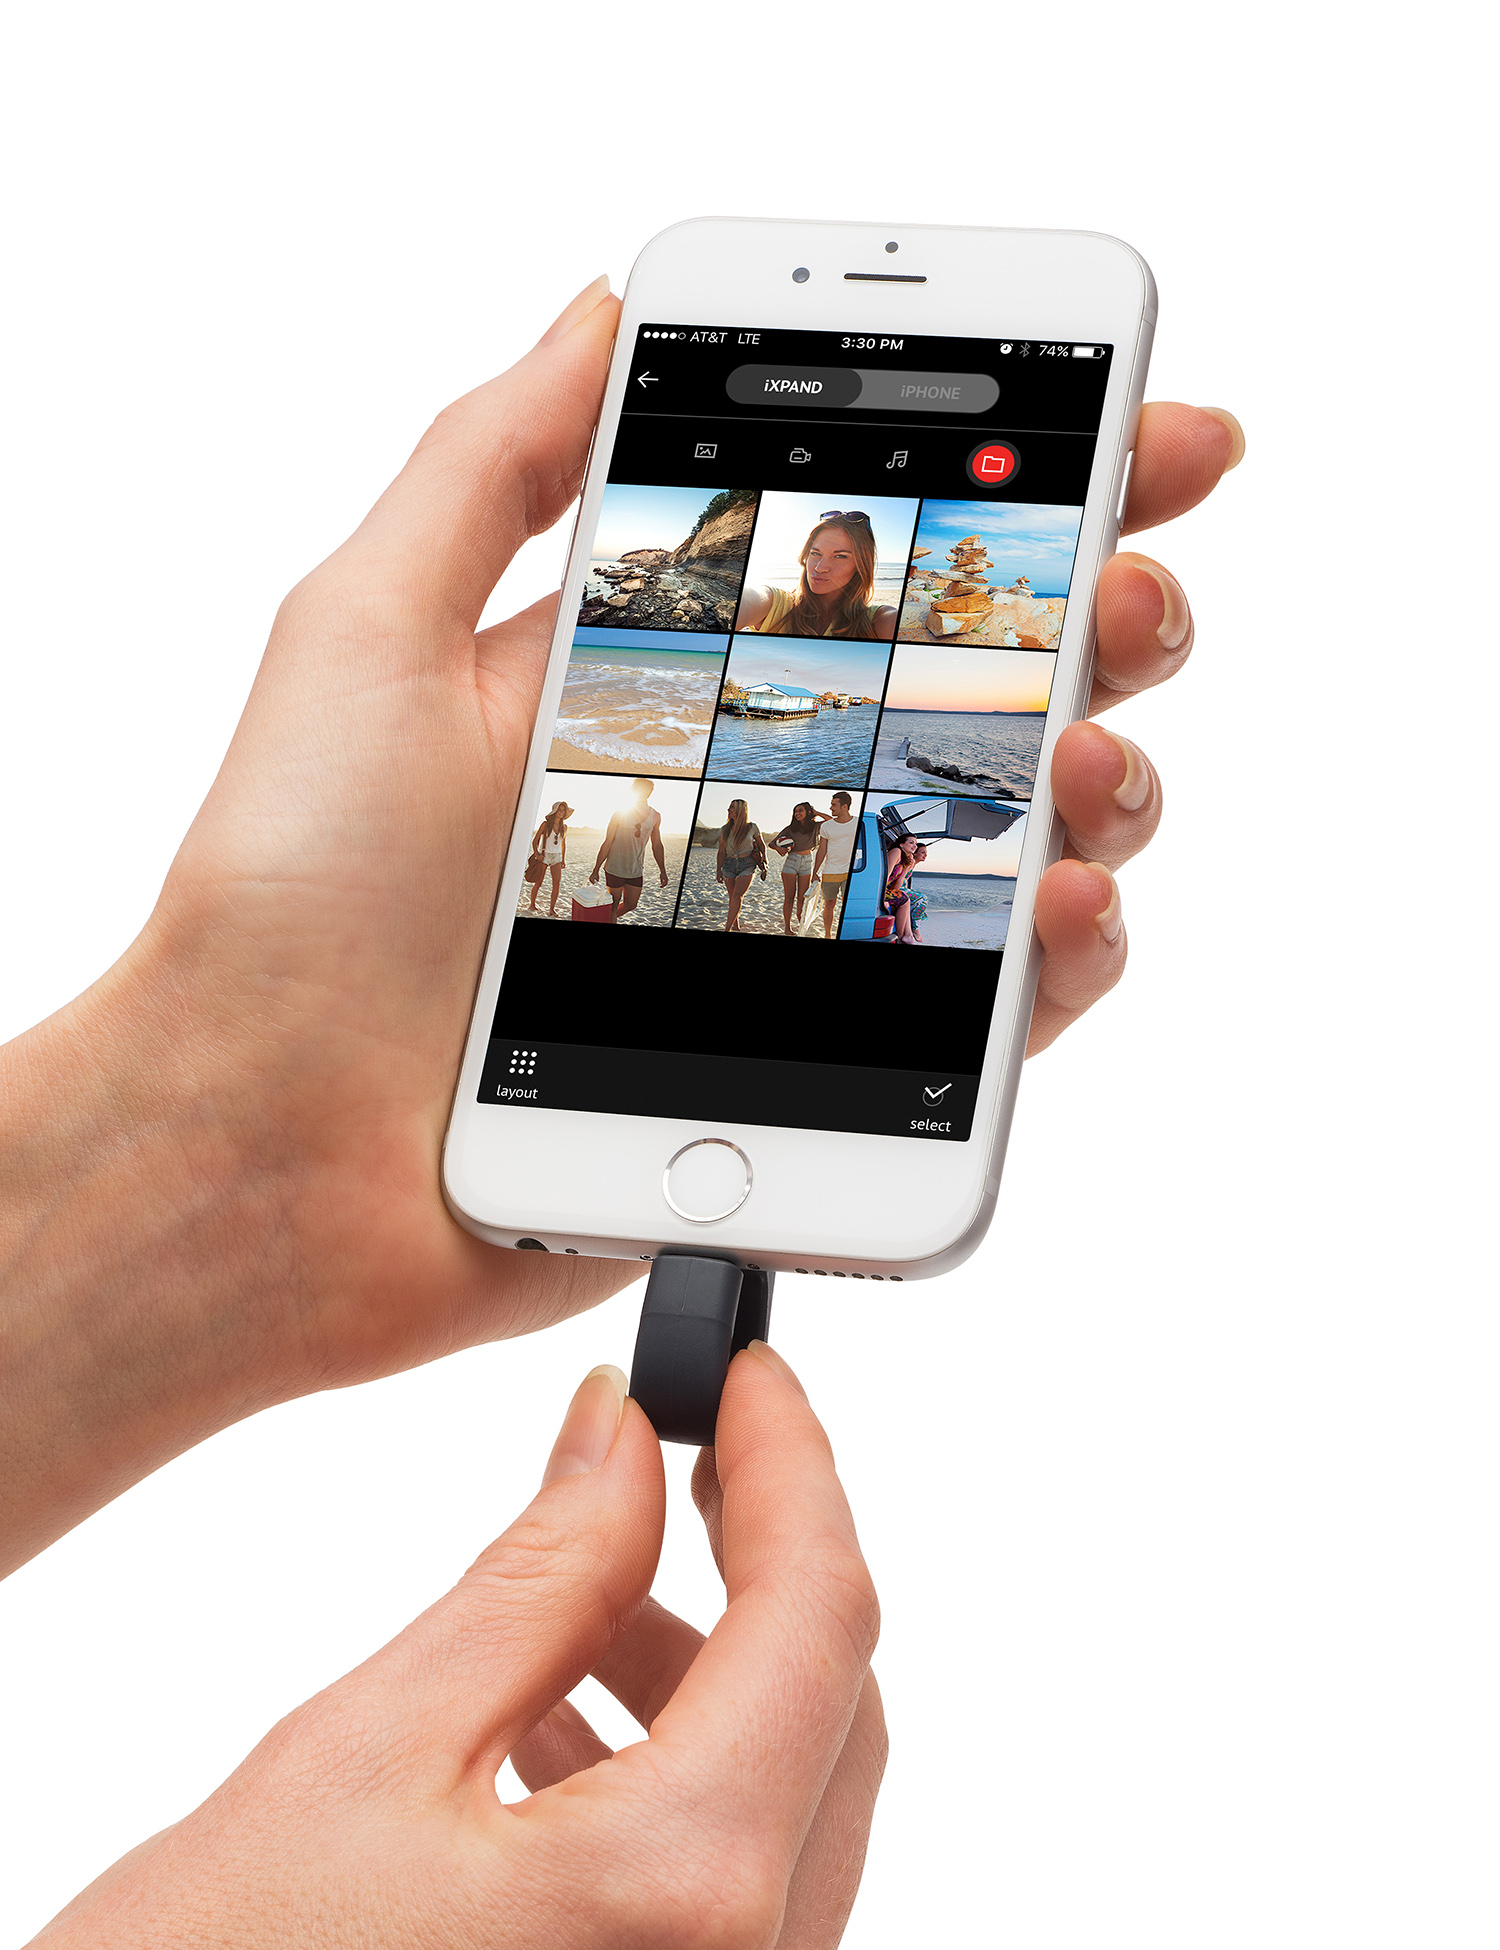 Product: iXpand Flash Drive – device in iPhone